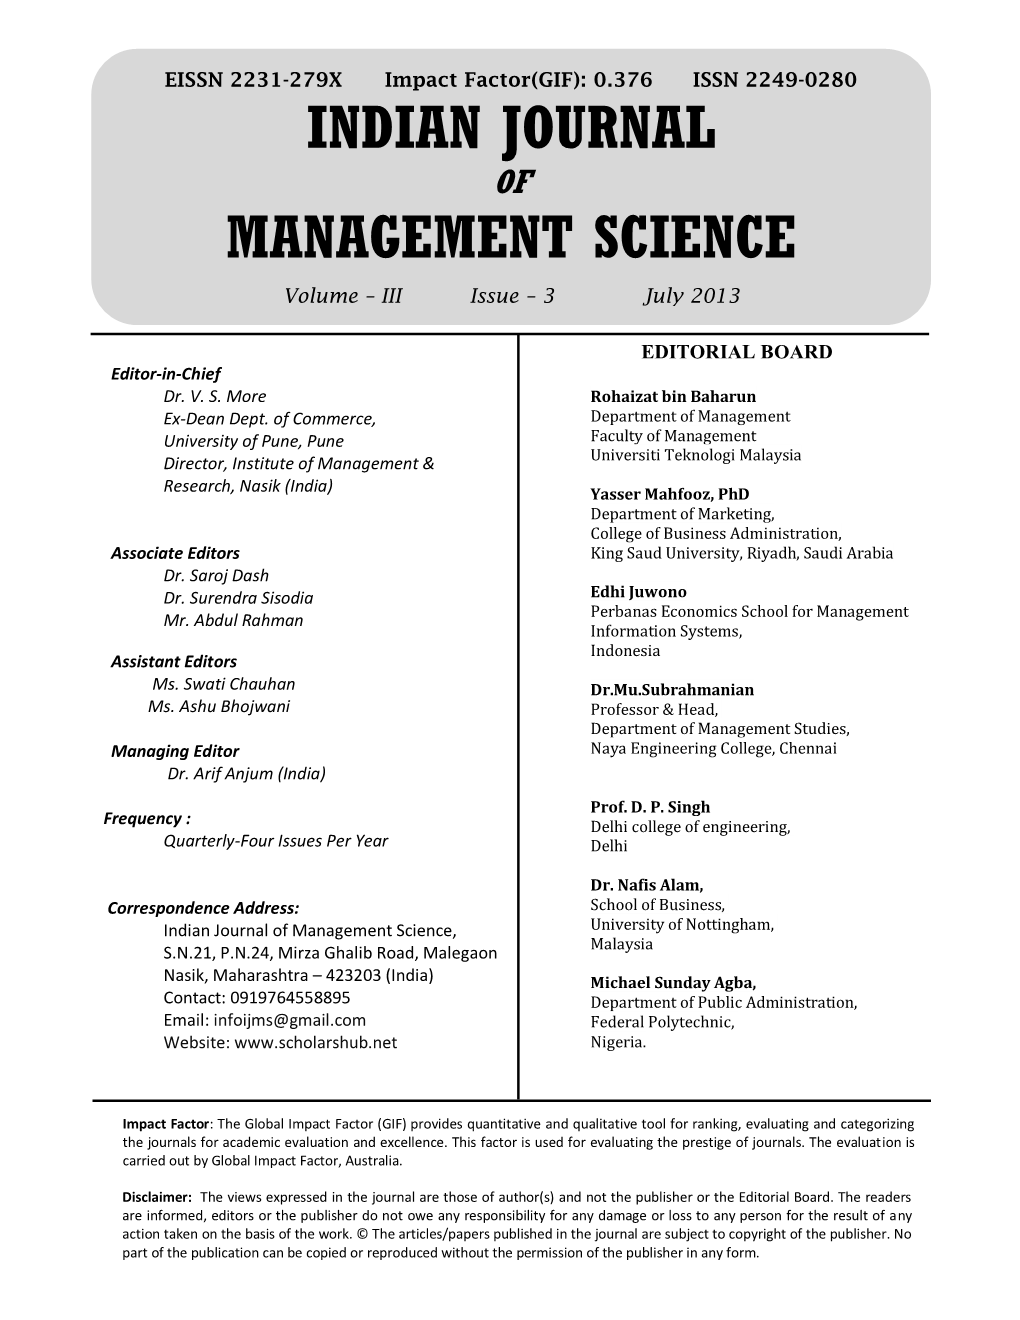 Indian Journal Management Science